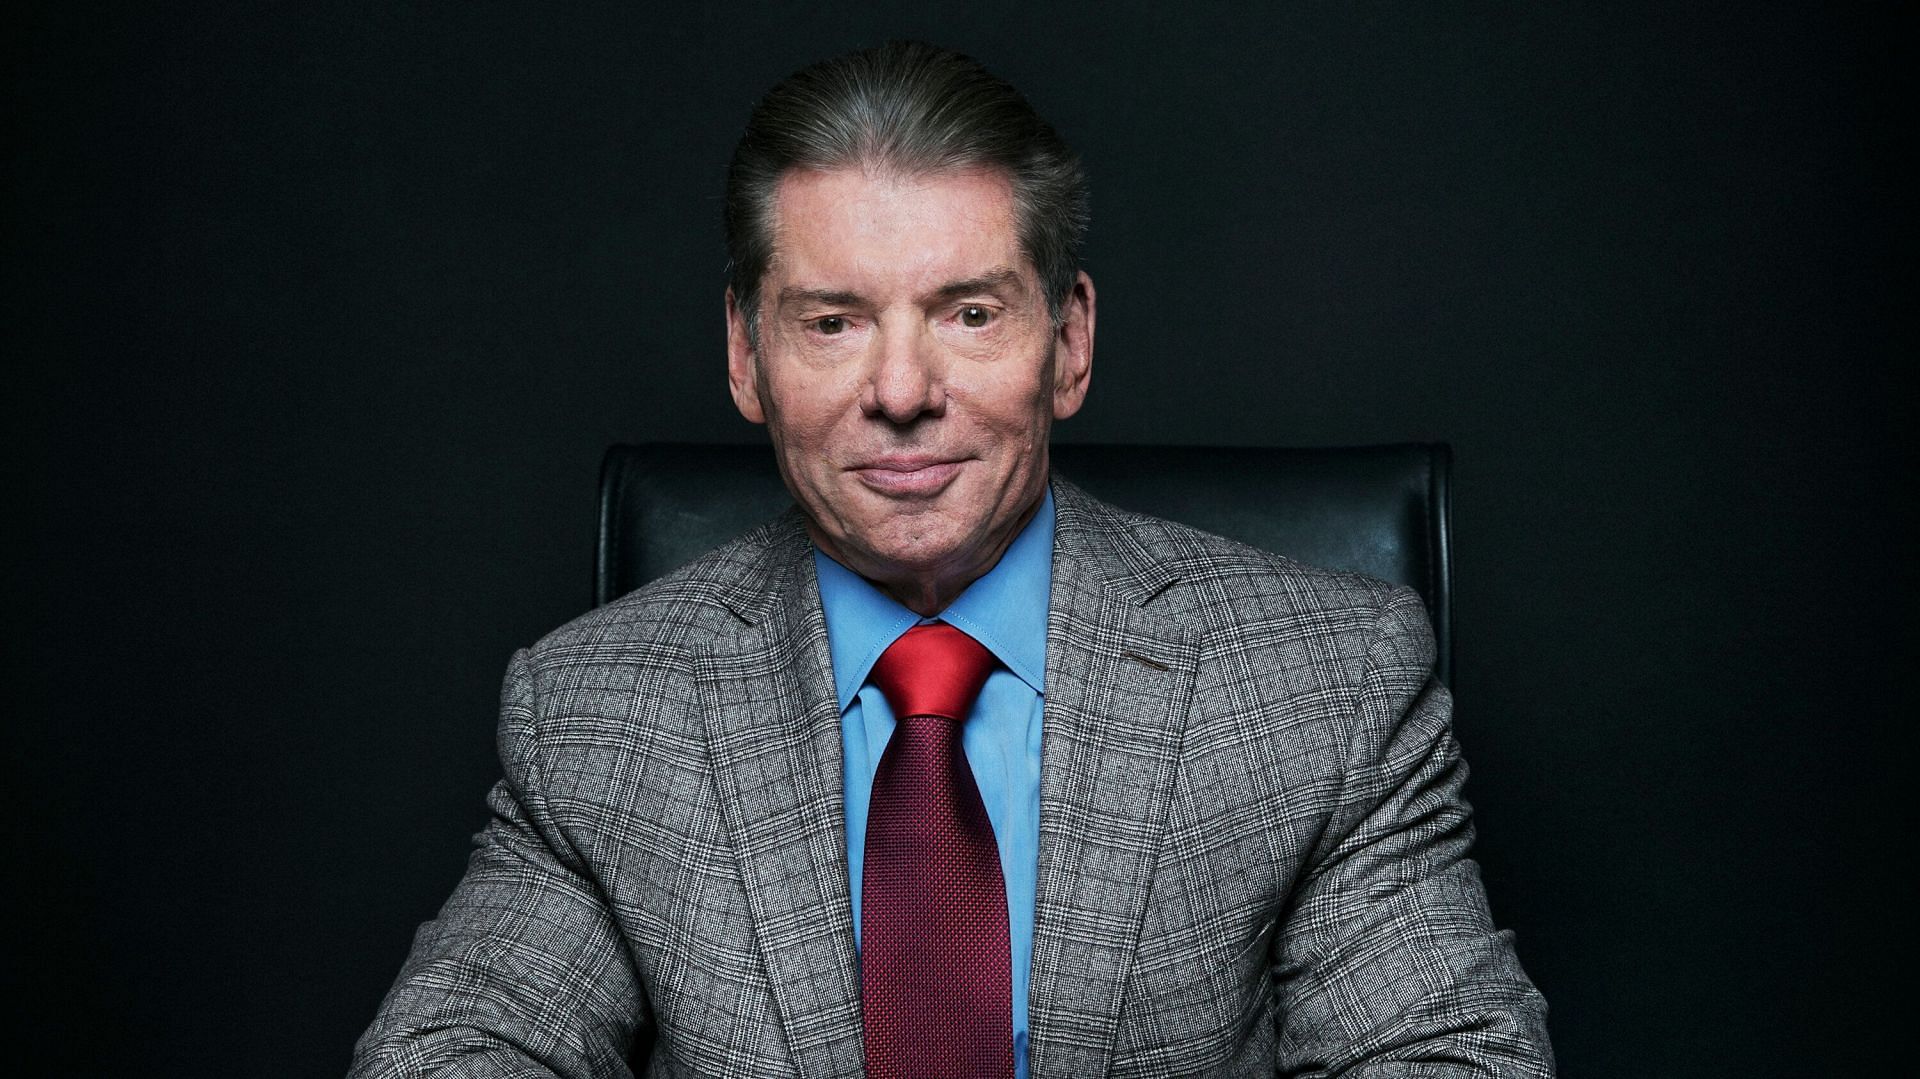 Vince McMahon has stepped back as Chairman of WWE